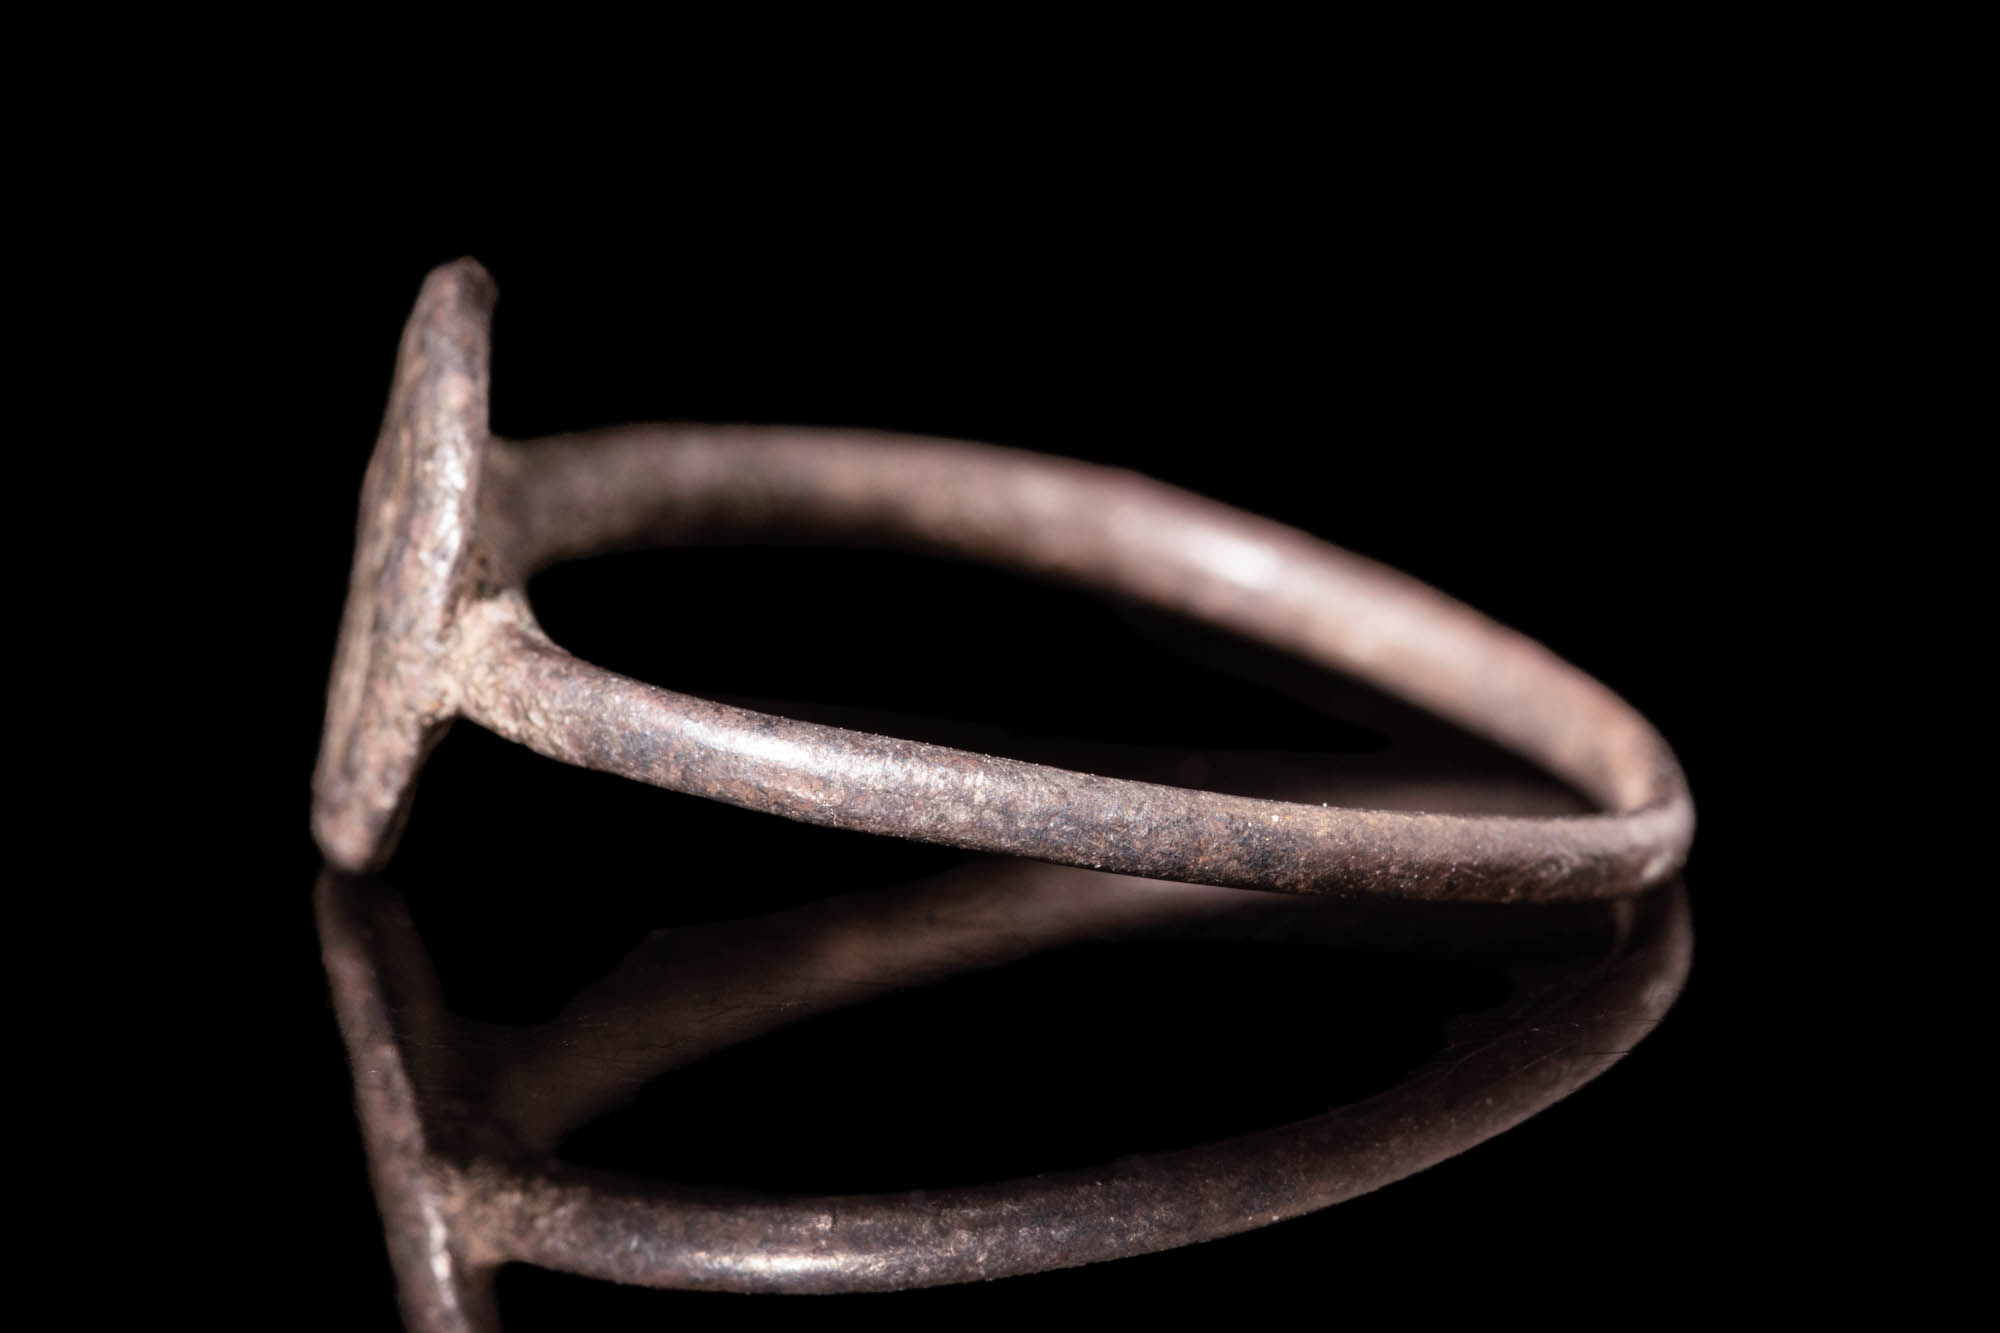 MEDIEVAL BRONZE RING WITH BEZEL DEPICTING TWO FIGURES AROUND A PALM TREE - Image 3 of 4